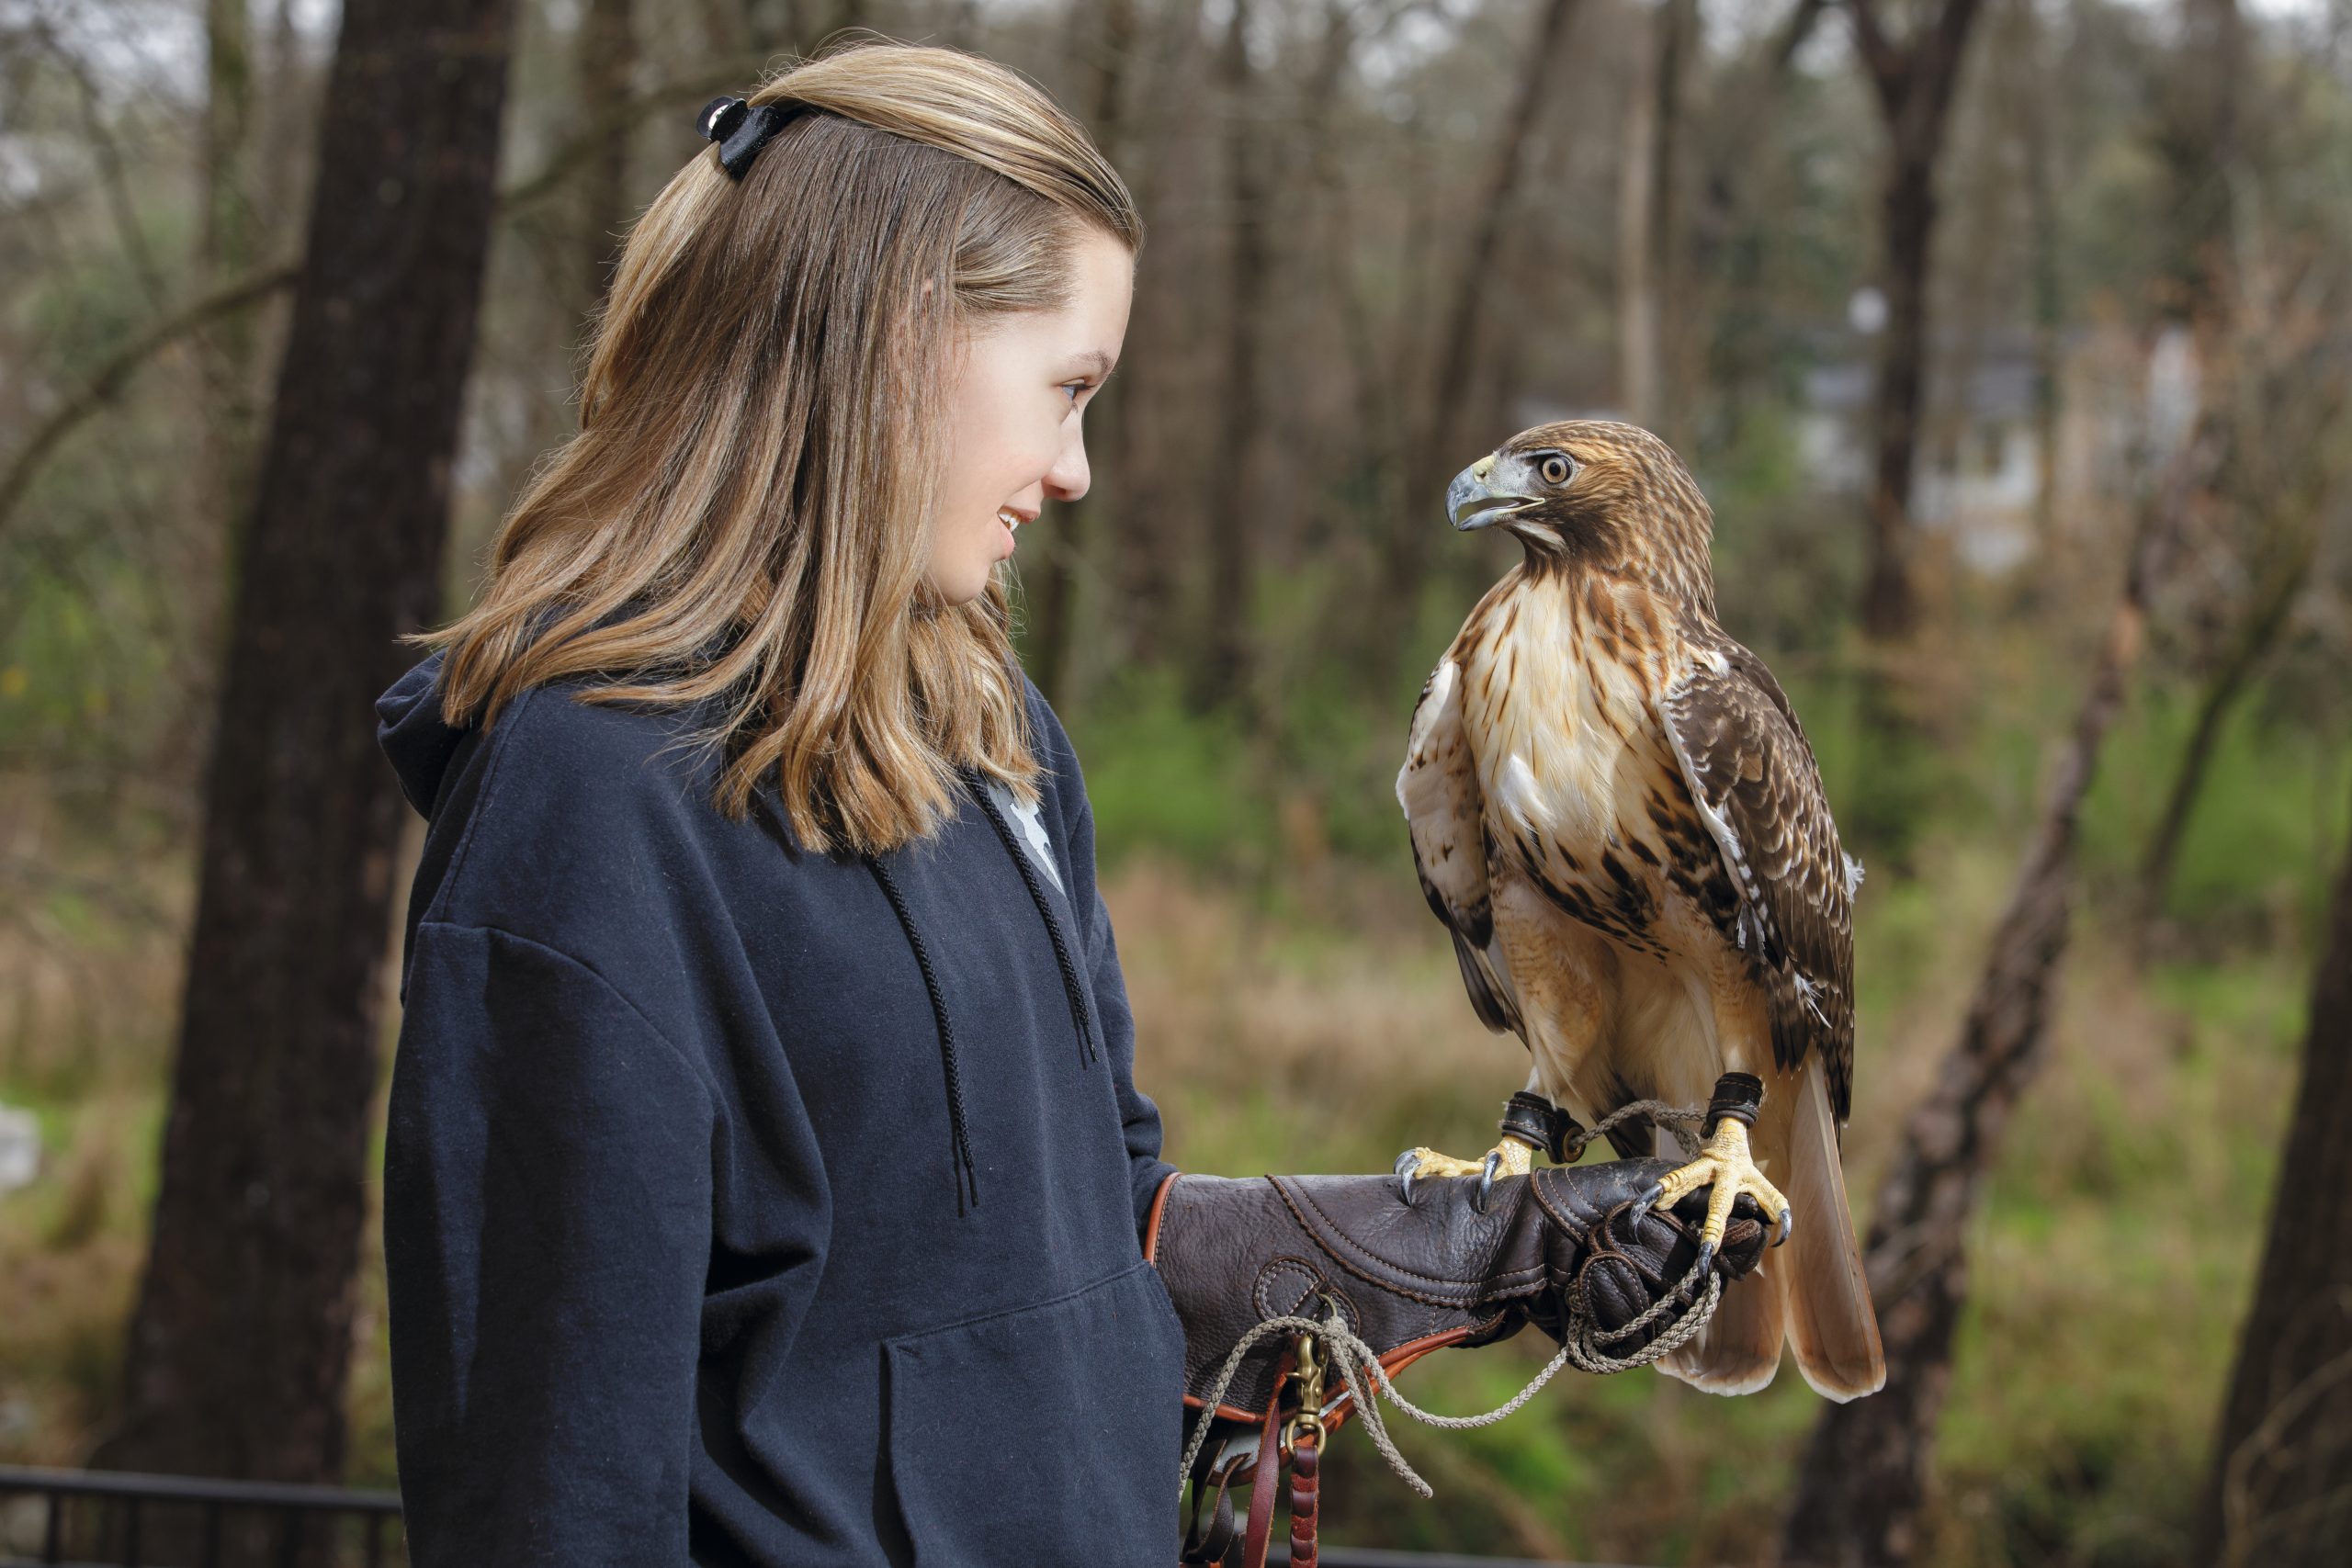 Richard’s daughter, Bailey, has been hunting with her father and their hawks for the past five years. Now a 20-year-old student at Davidson College, she recently began officially apprenticing with her father to earn her own falconry license. 